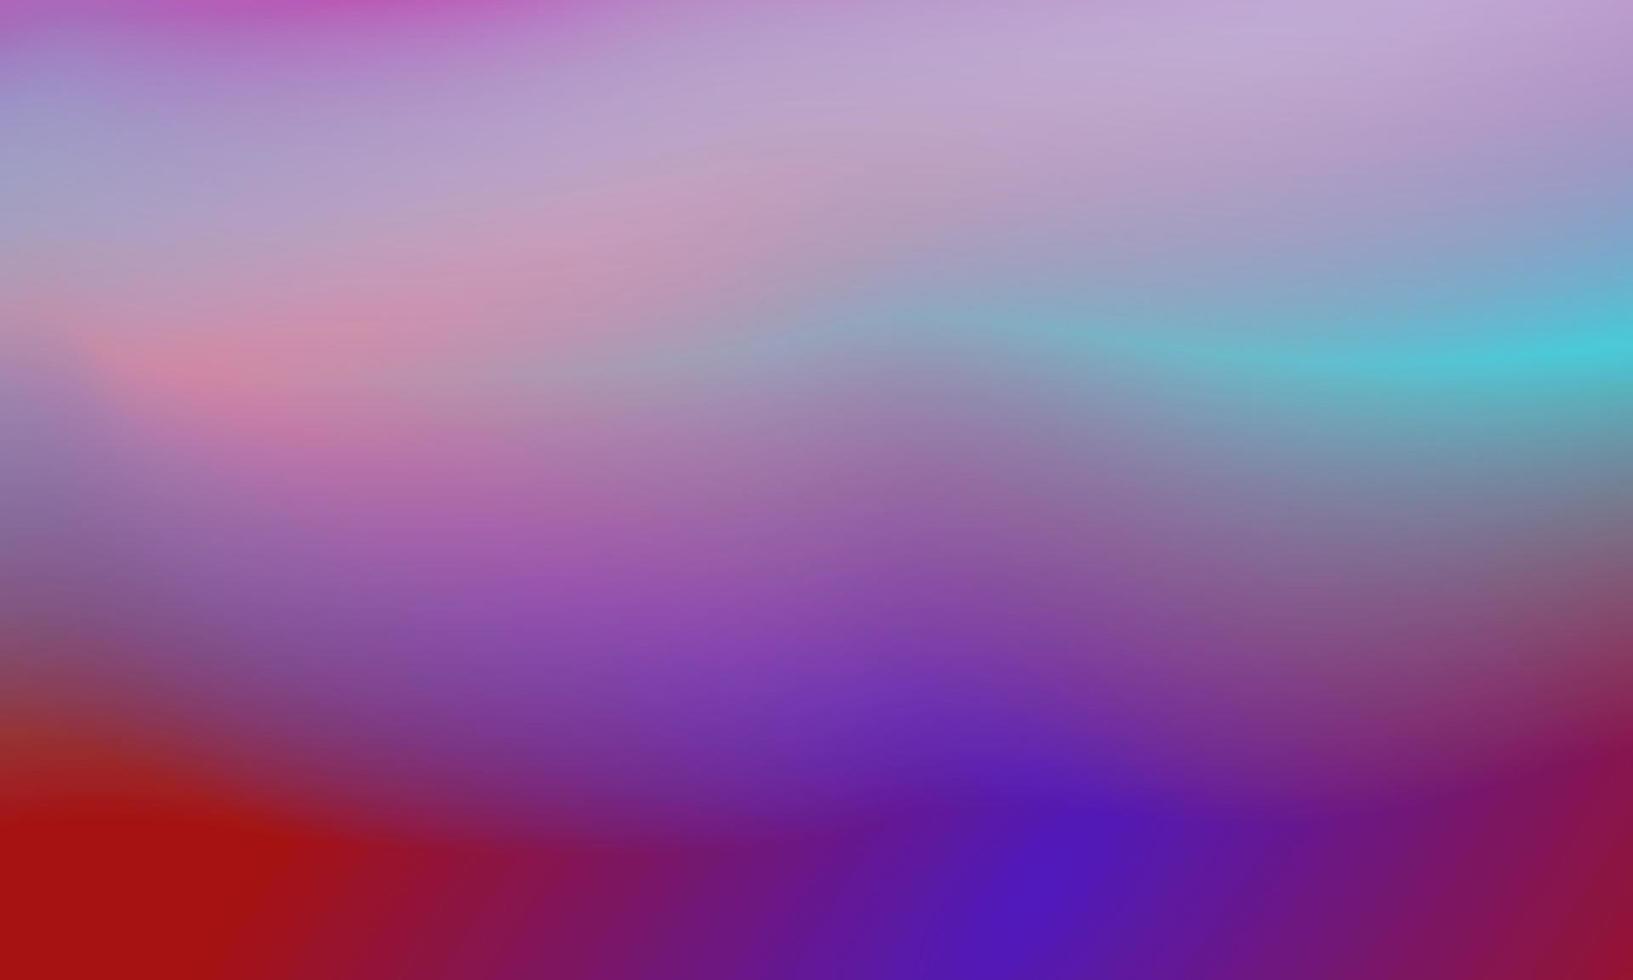 Beautiful gradient background pink, blue and red smooth and soft texture vector